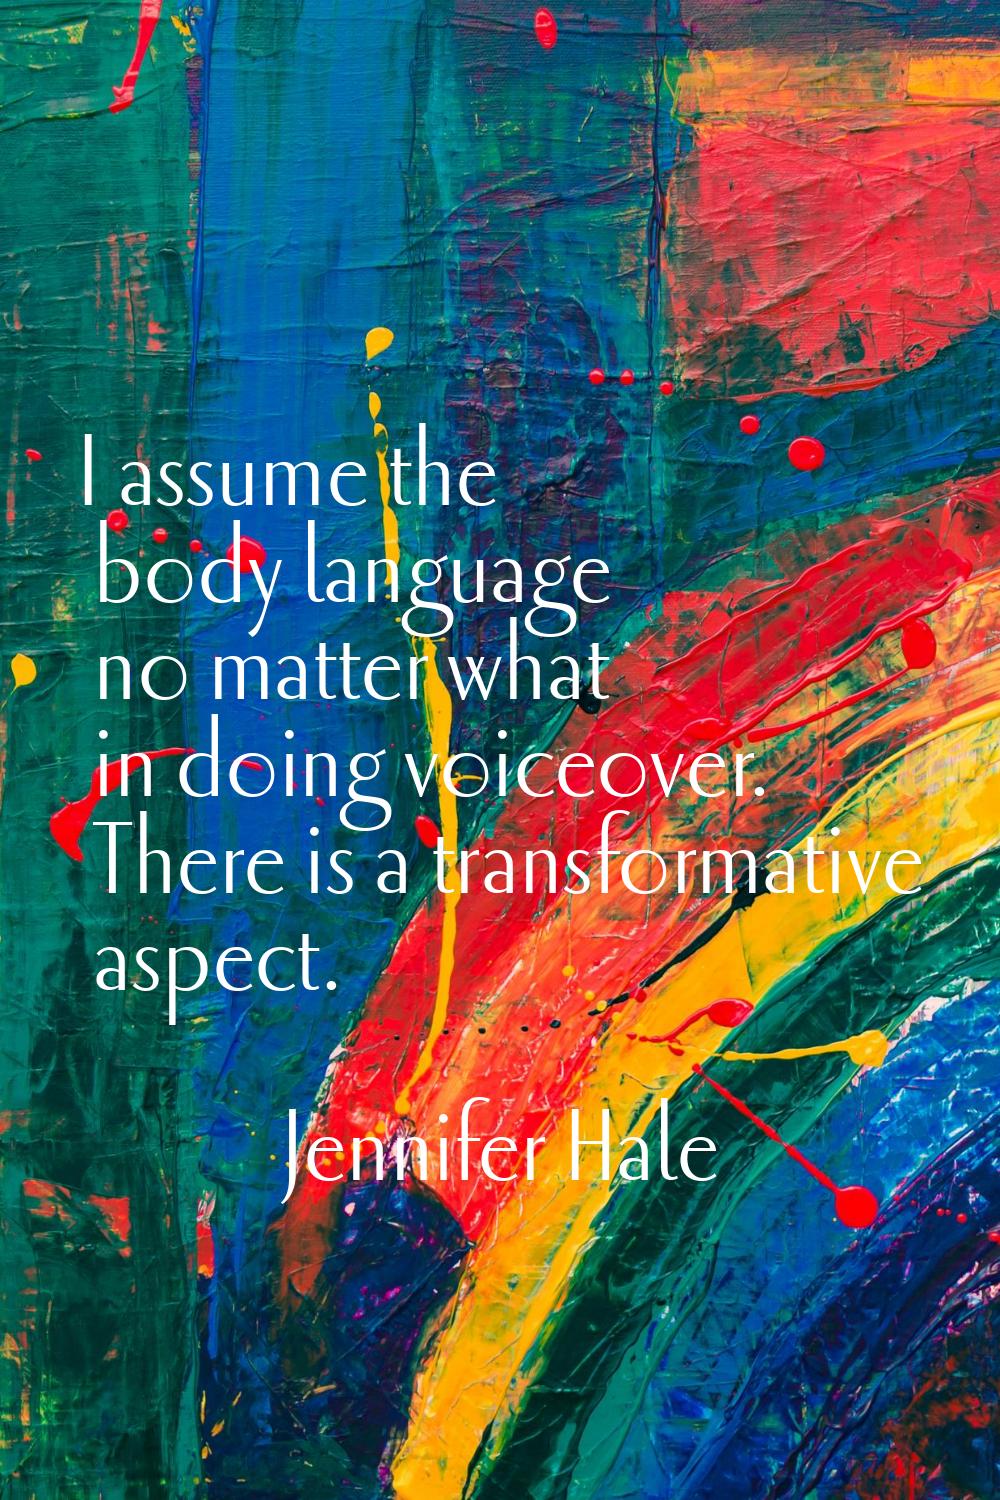 I assume the body language no matter what in doing voiceover. There is a transformative aspect.